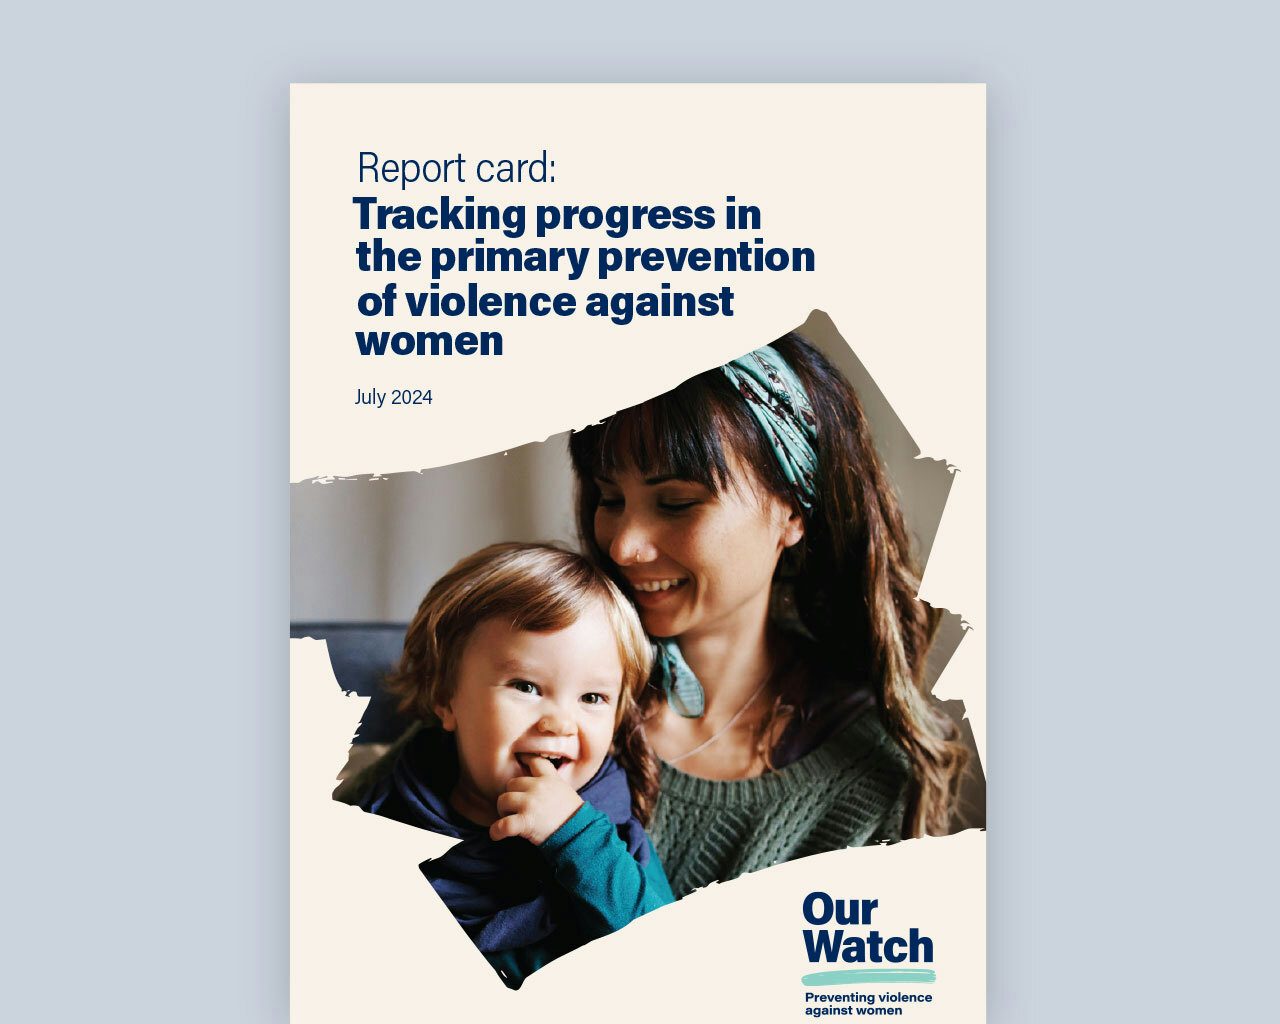 Publication cover shows image of young mother and child hugging and smiling, alongside title and Our Watch logo.